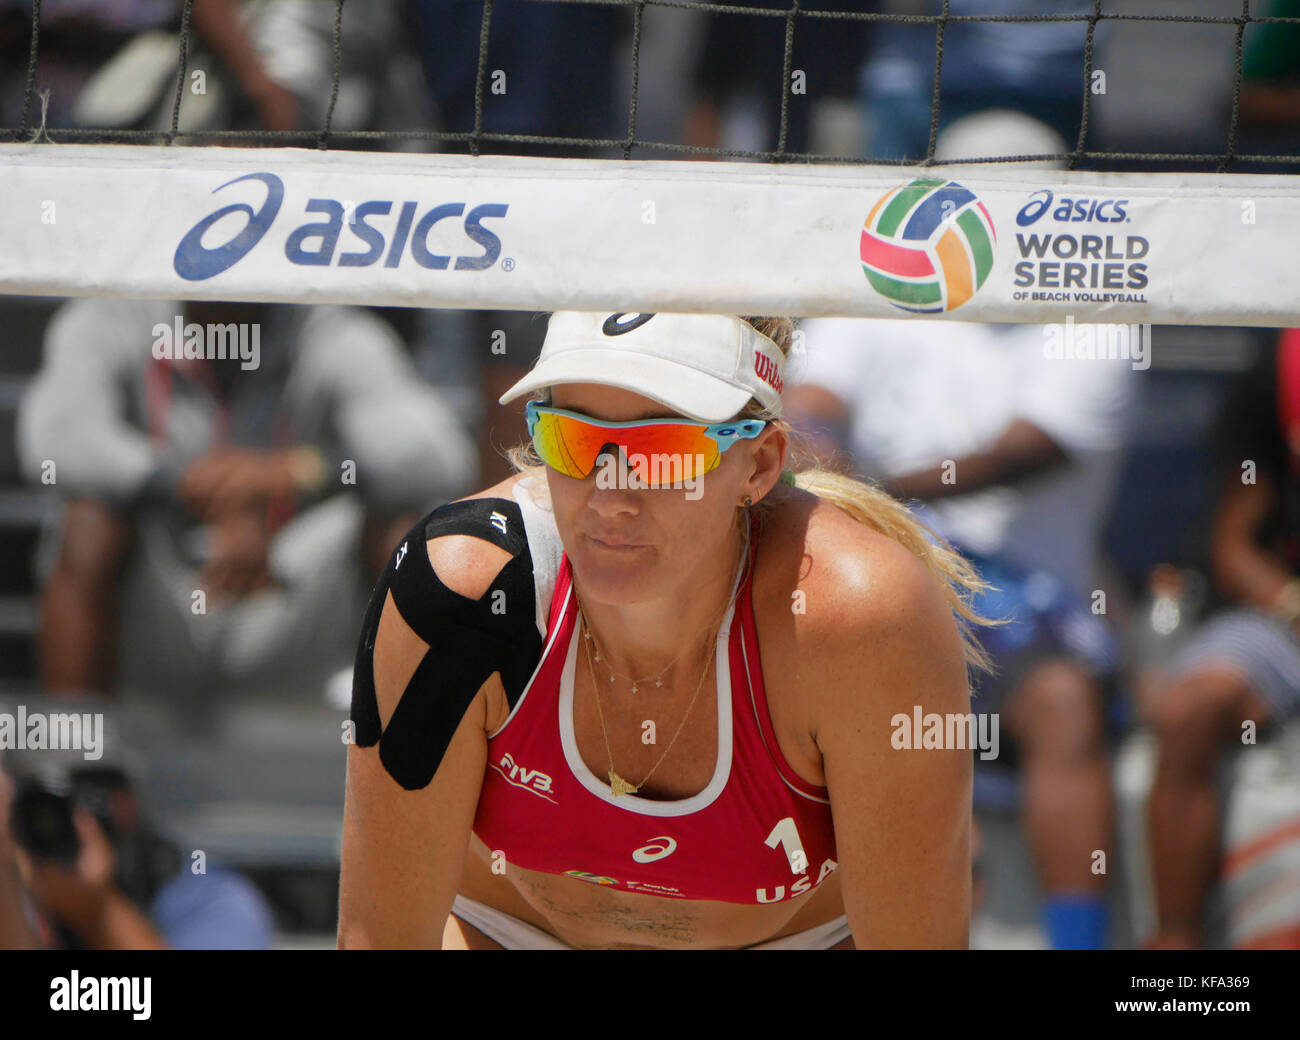 Pro volleyball player Kerri Walsh Jennings at the net at the ASICS World Series of Beach Volleyball on August 23, 2015 in Long Beach, California. Photo by Francis Specker Stock Photo